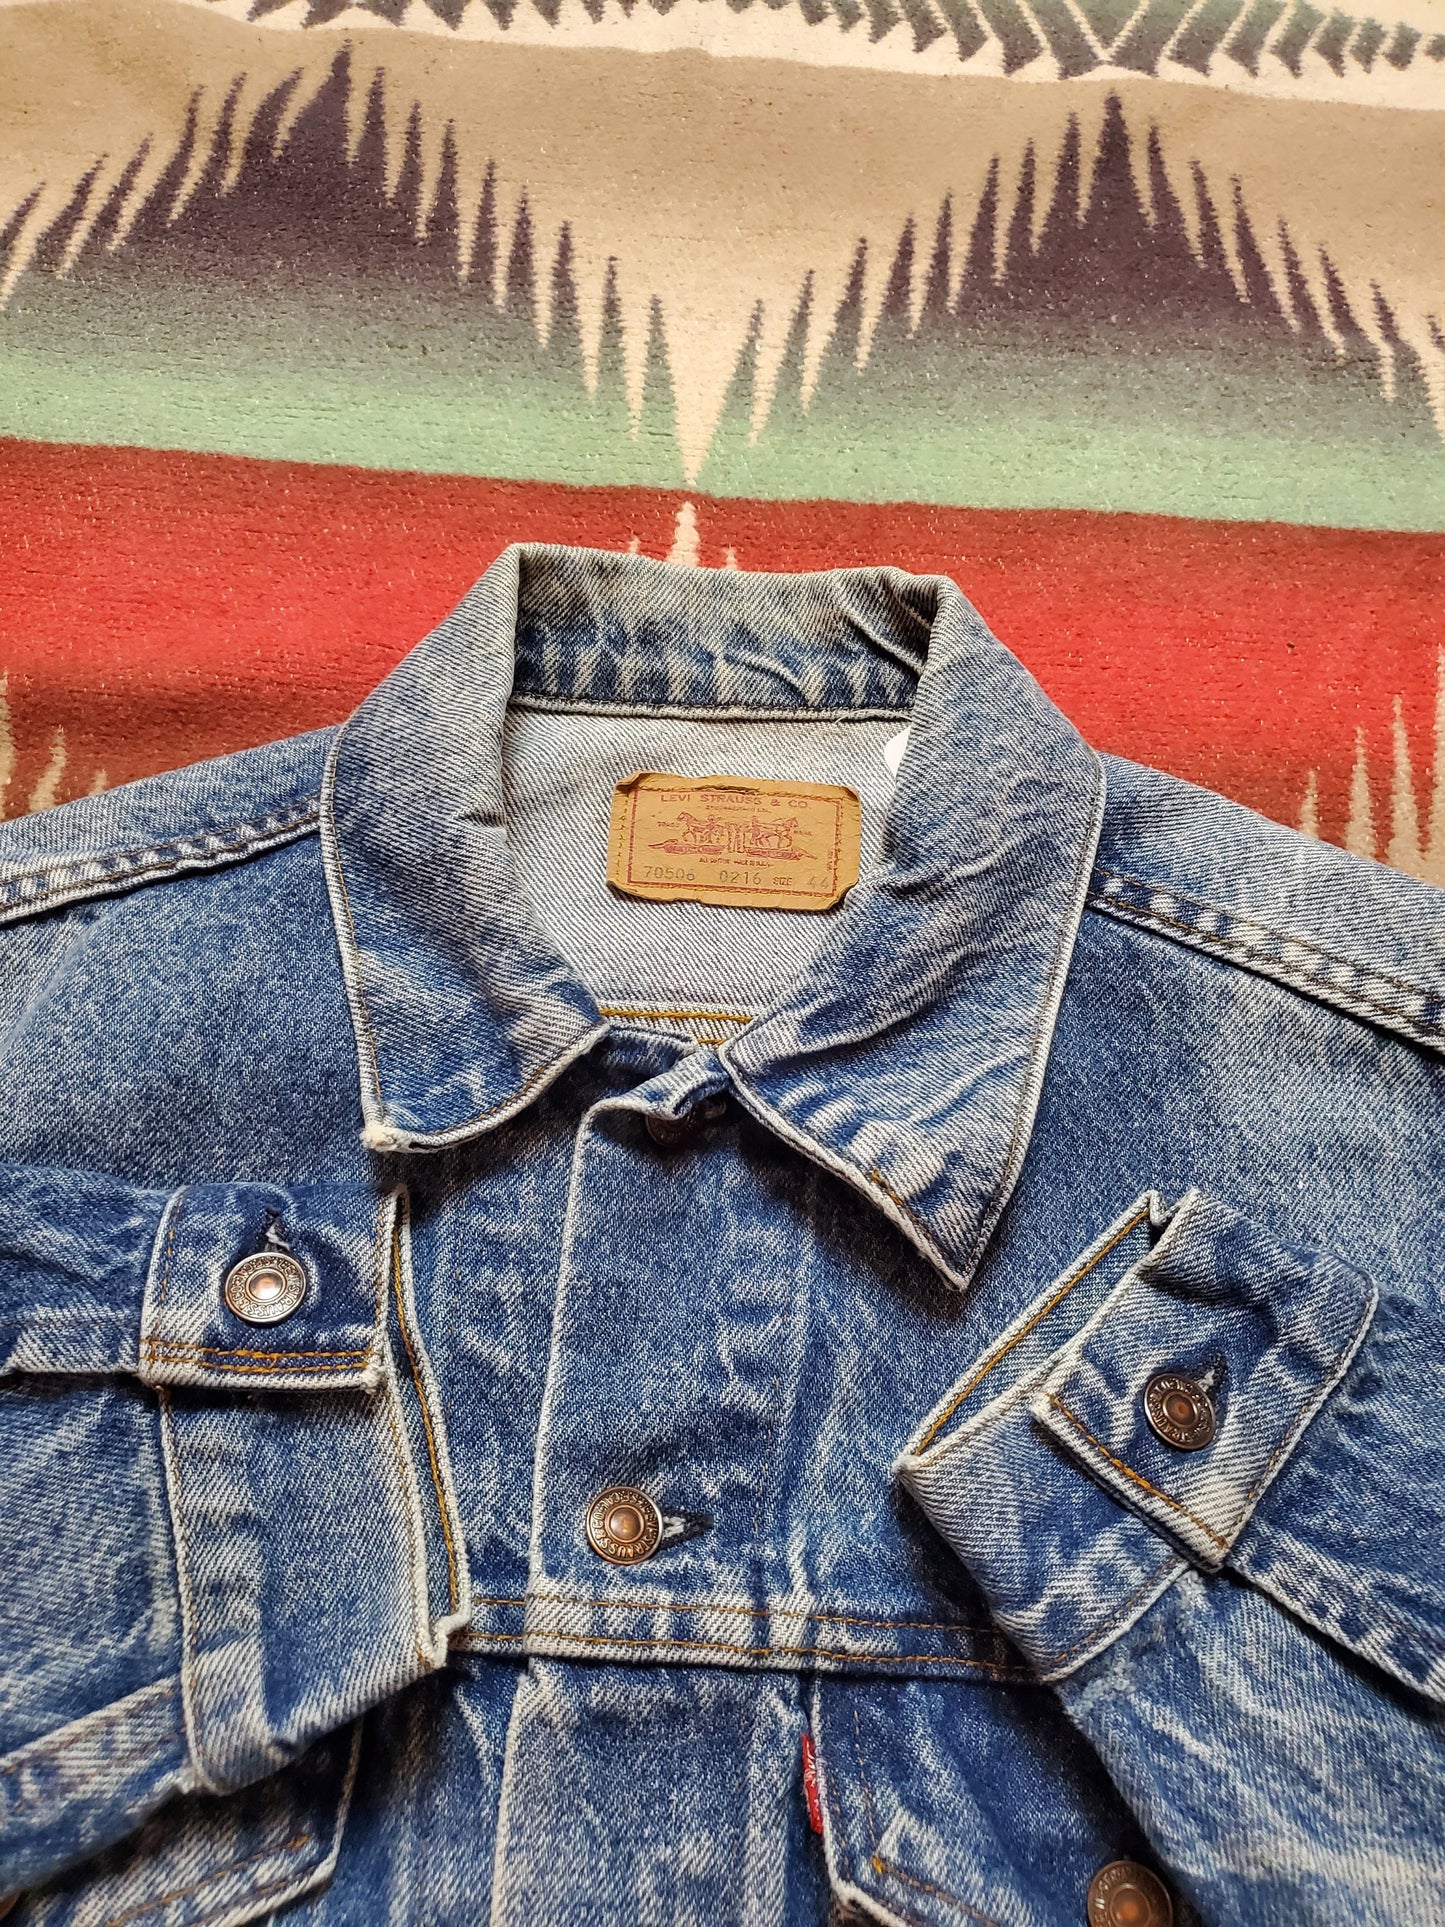 1980s Levi's Denim Trucker Jacket 20506-0216 Made in USA Size L